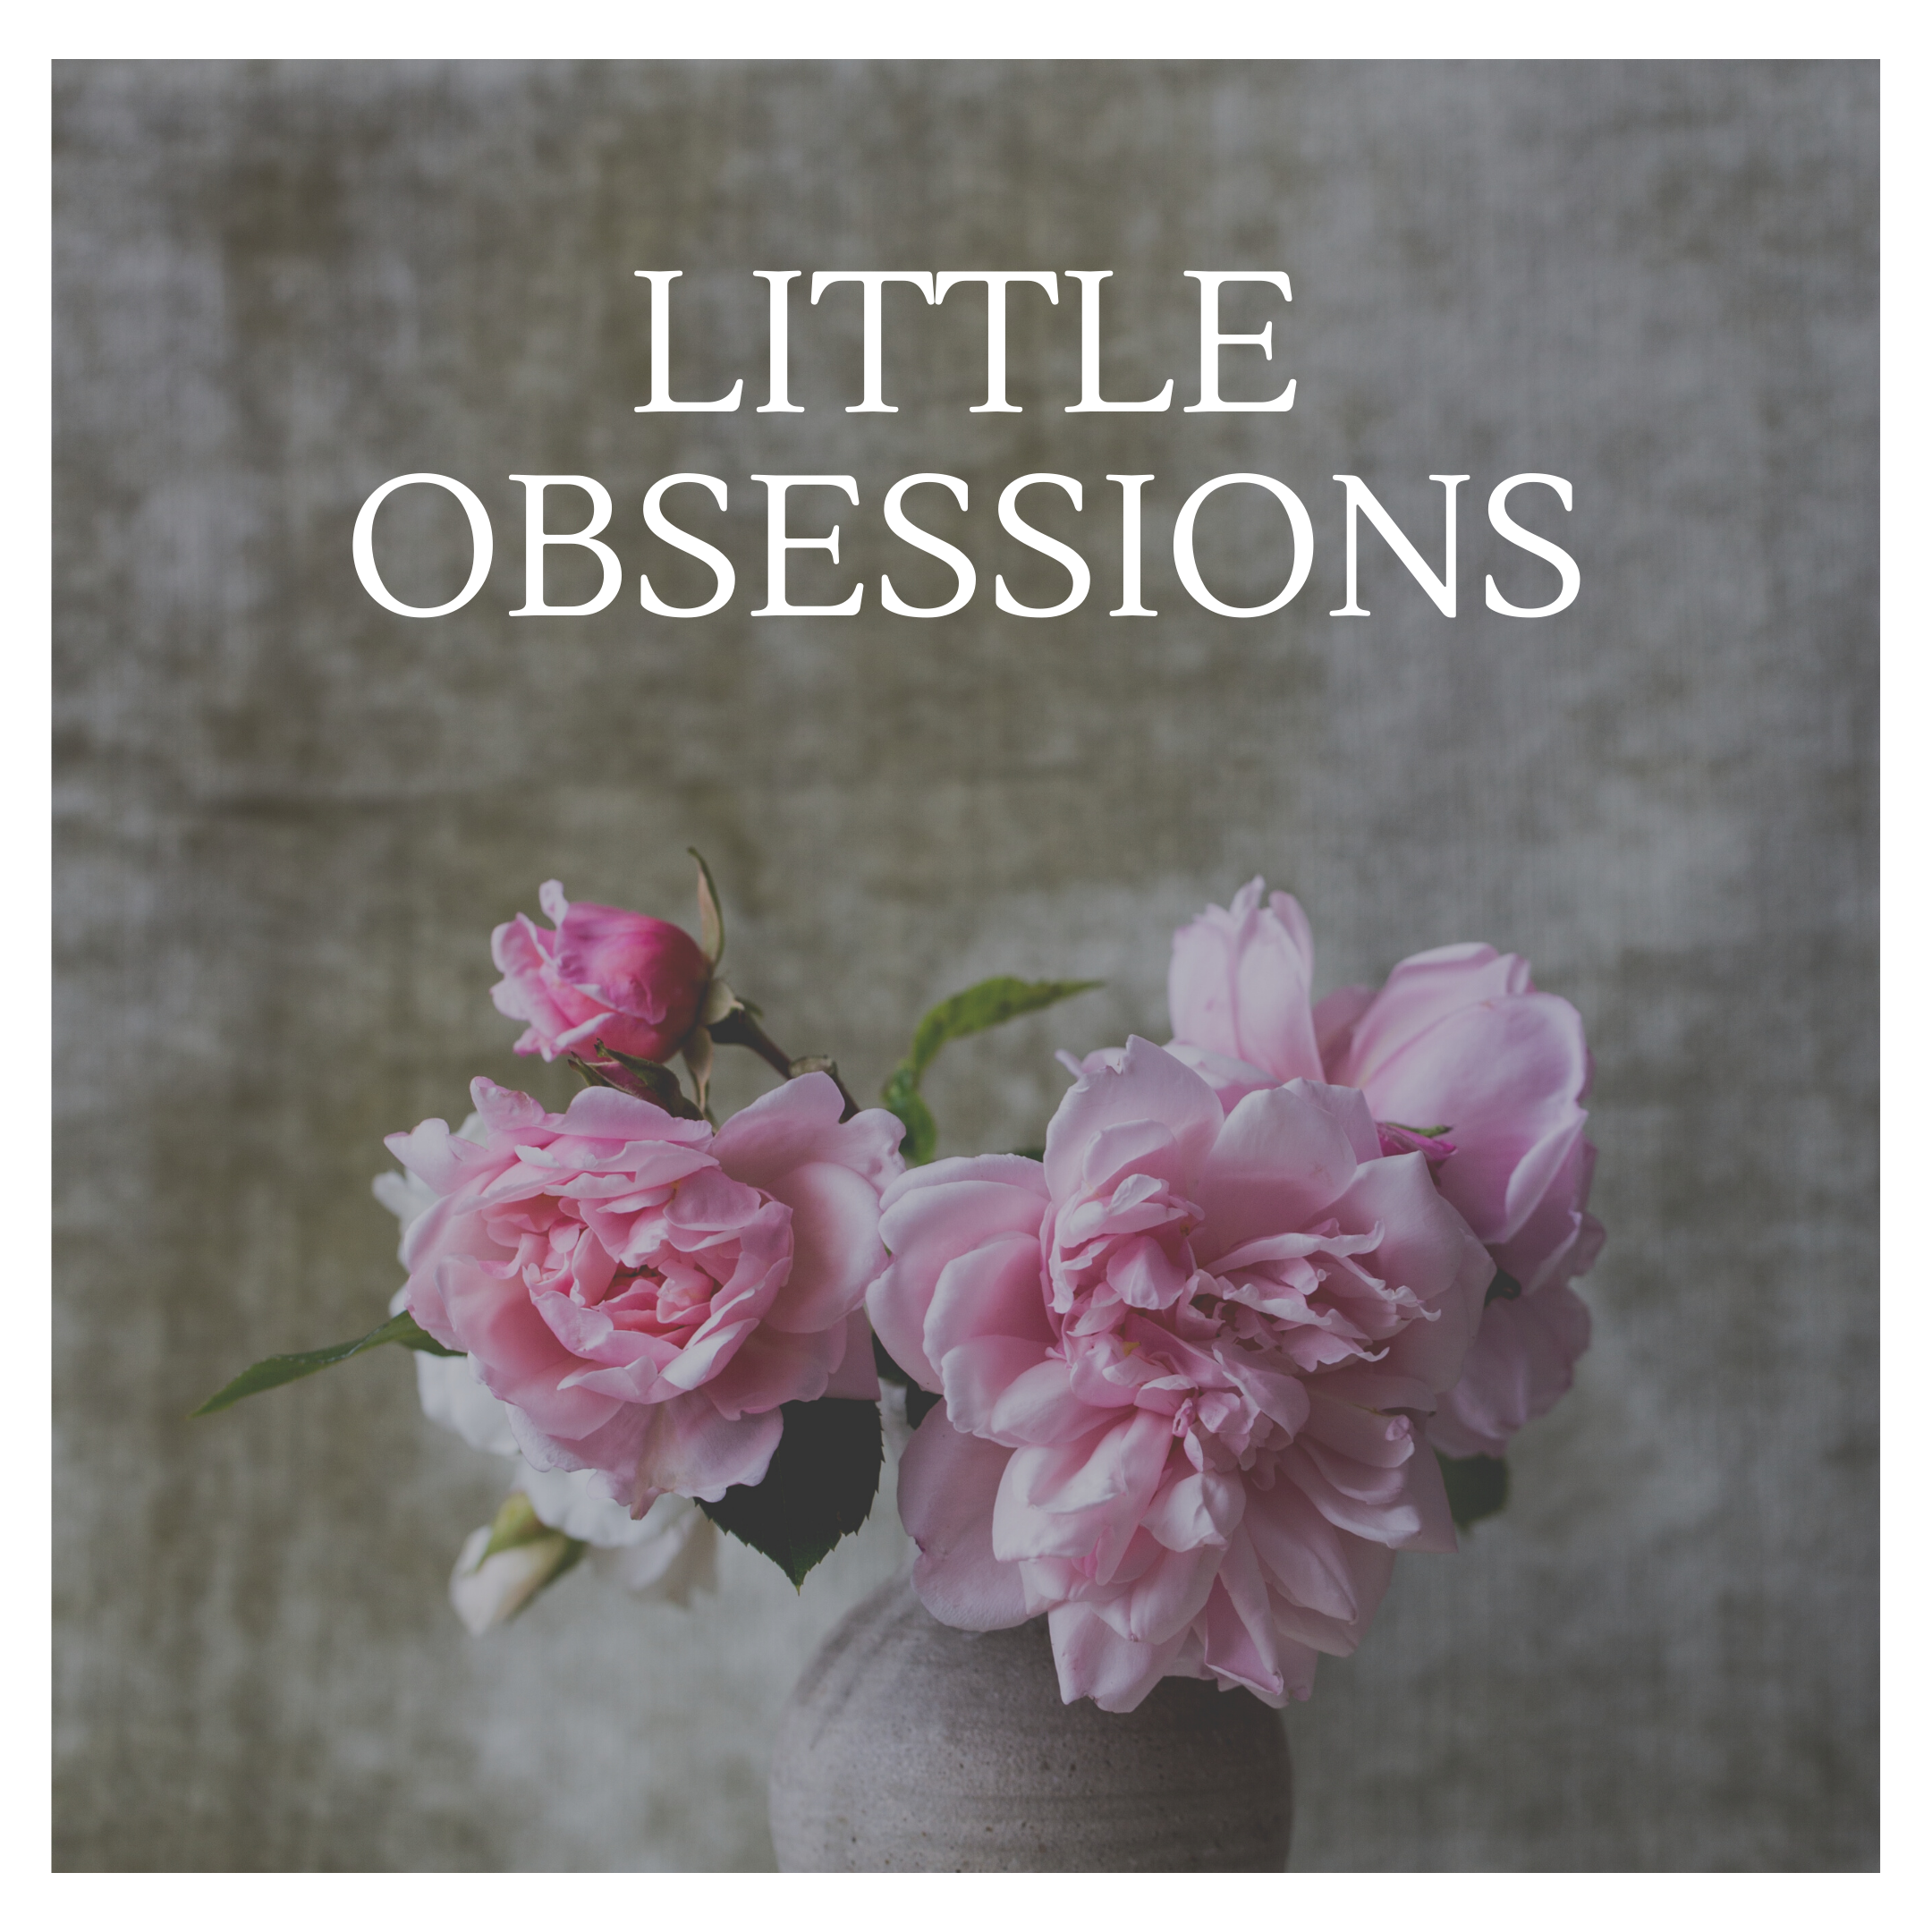 Little Obessions